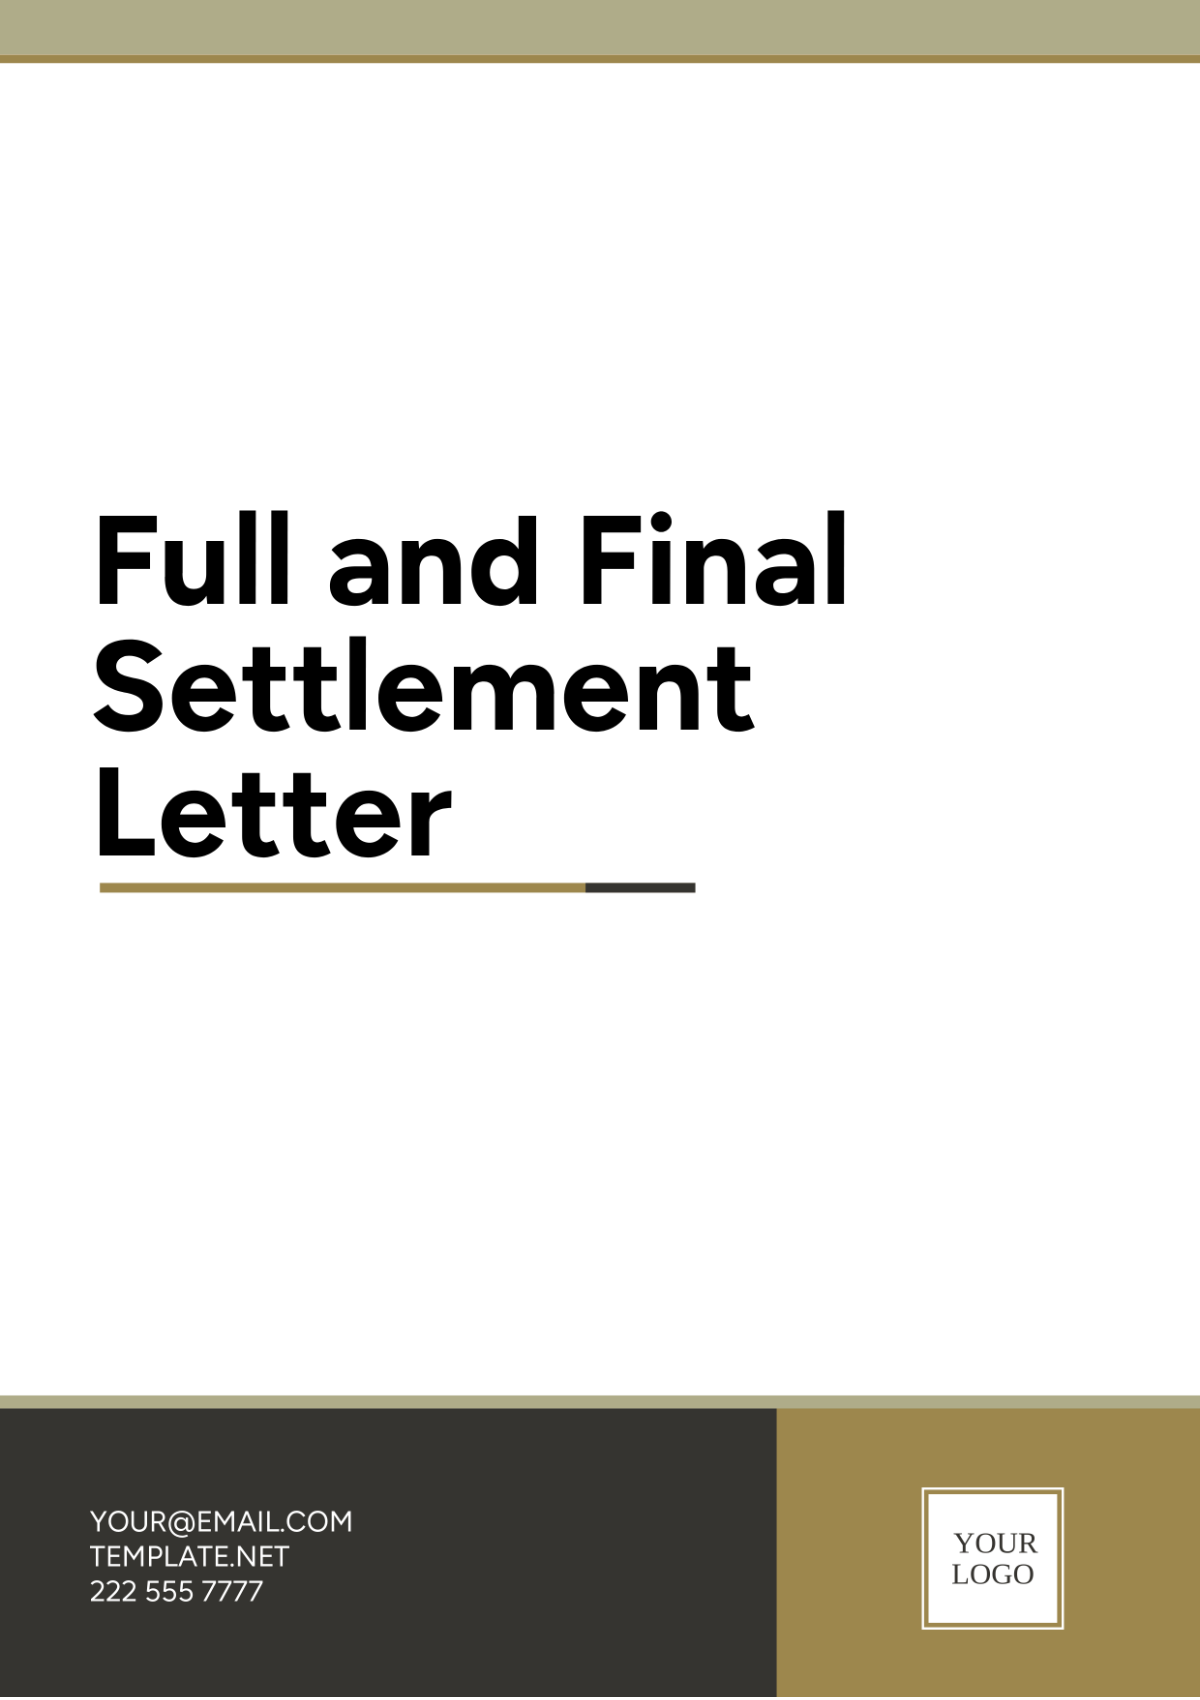 Free Full and Final Settlement Letter Template